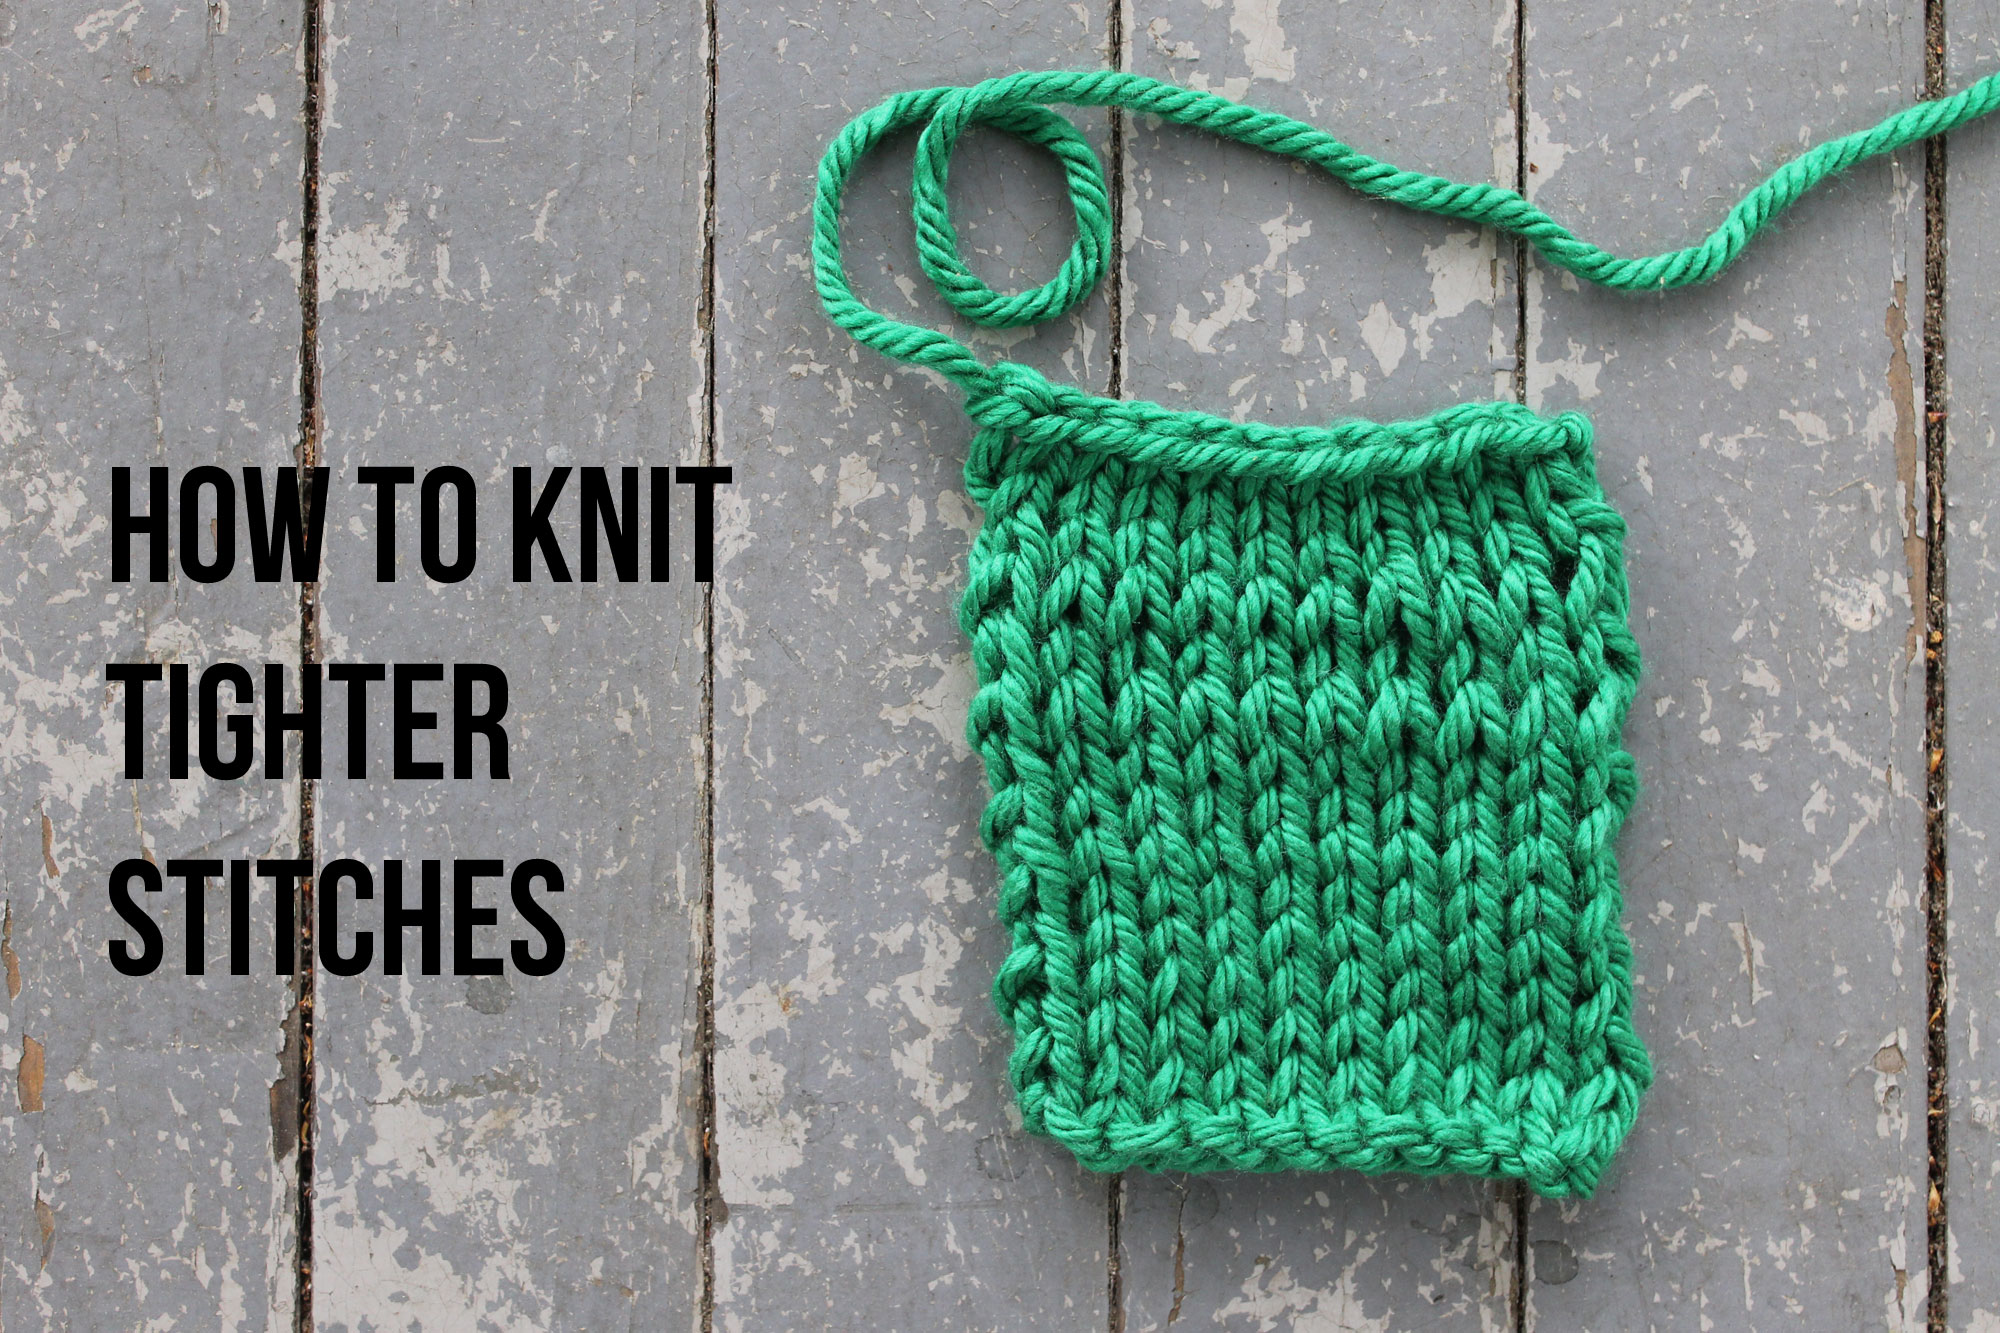 How to Knit Tighter Stitches